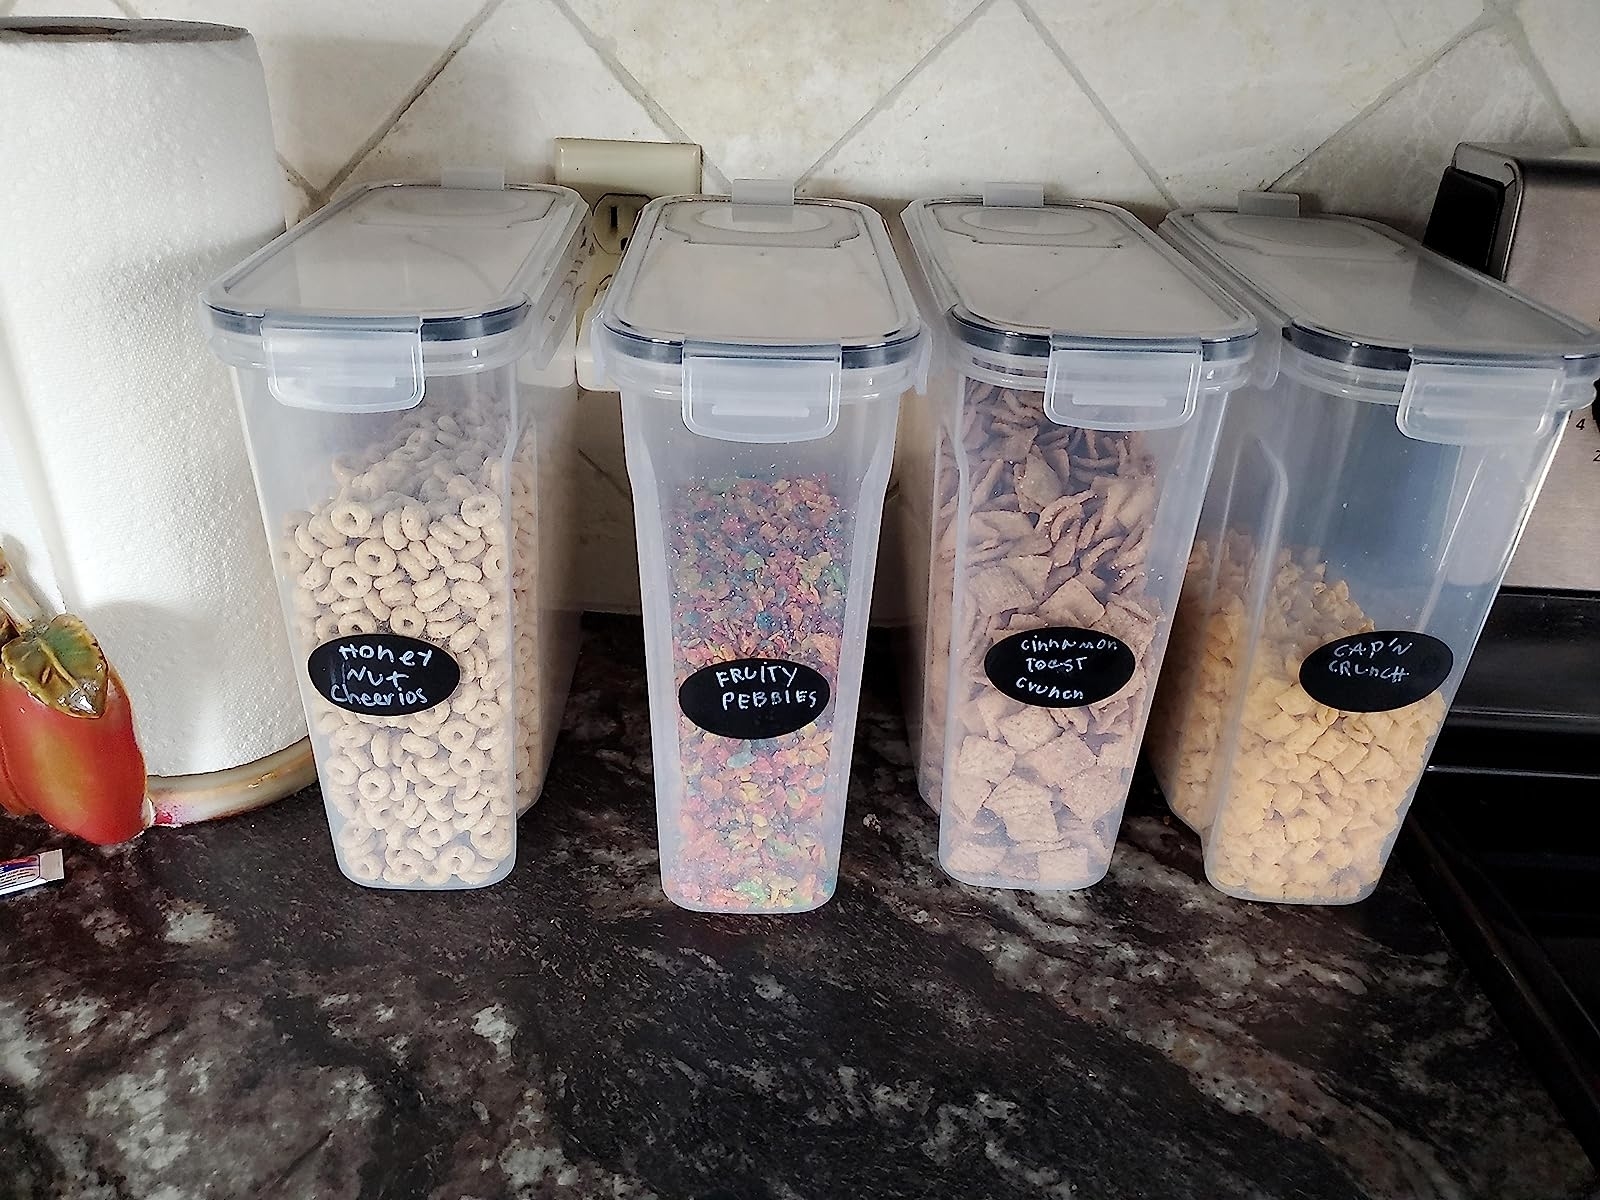 Reviewer image of four labeled cereal containers on their countertop